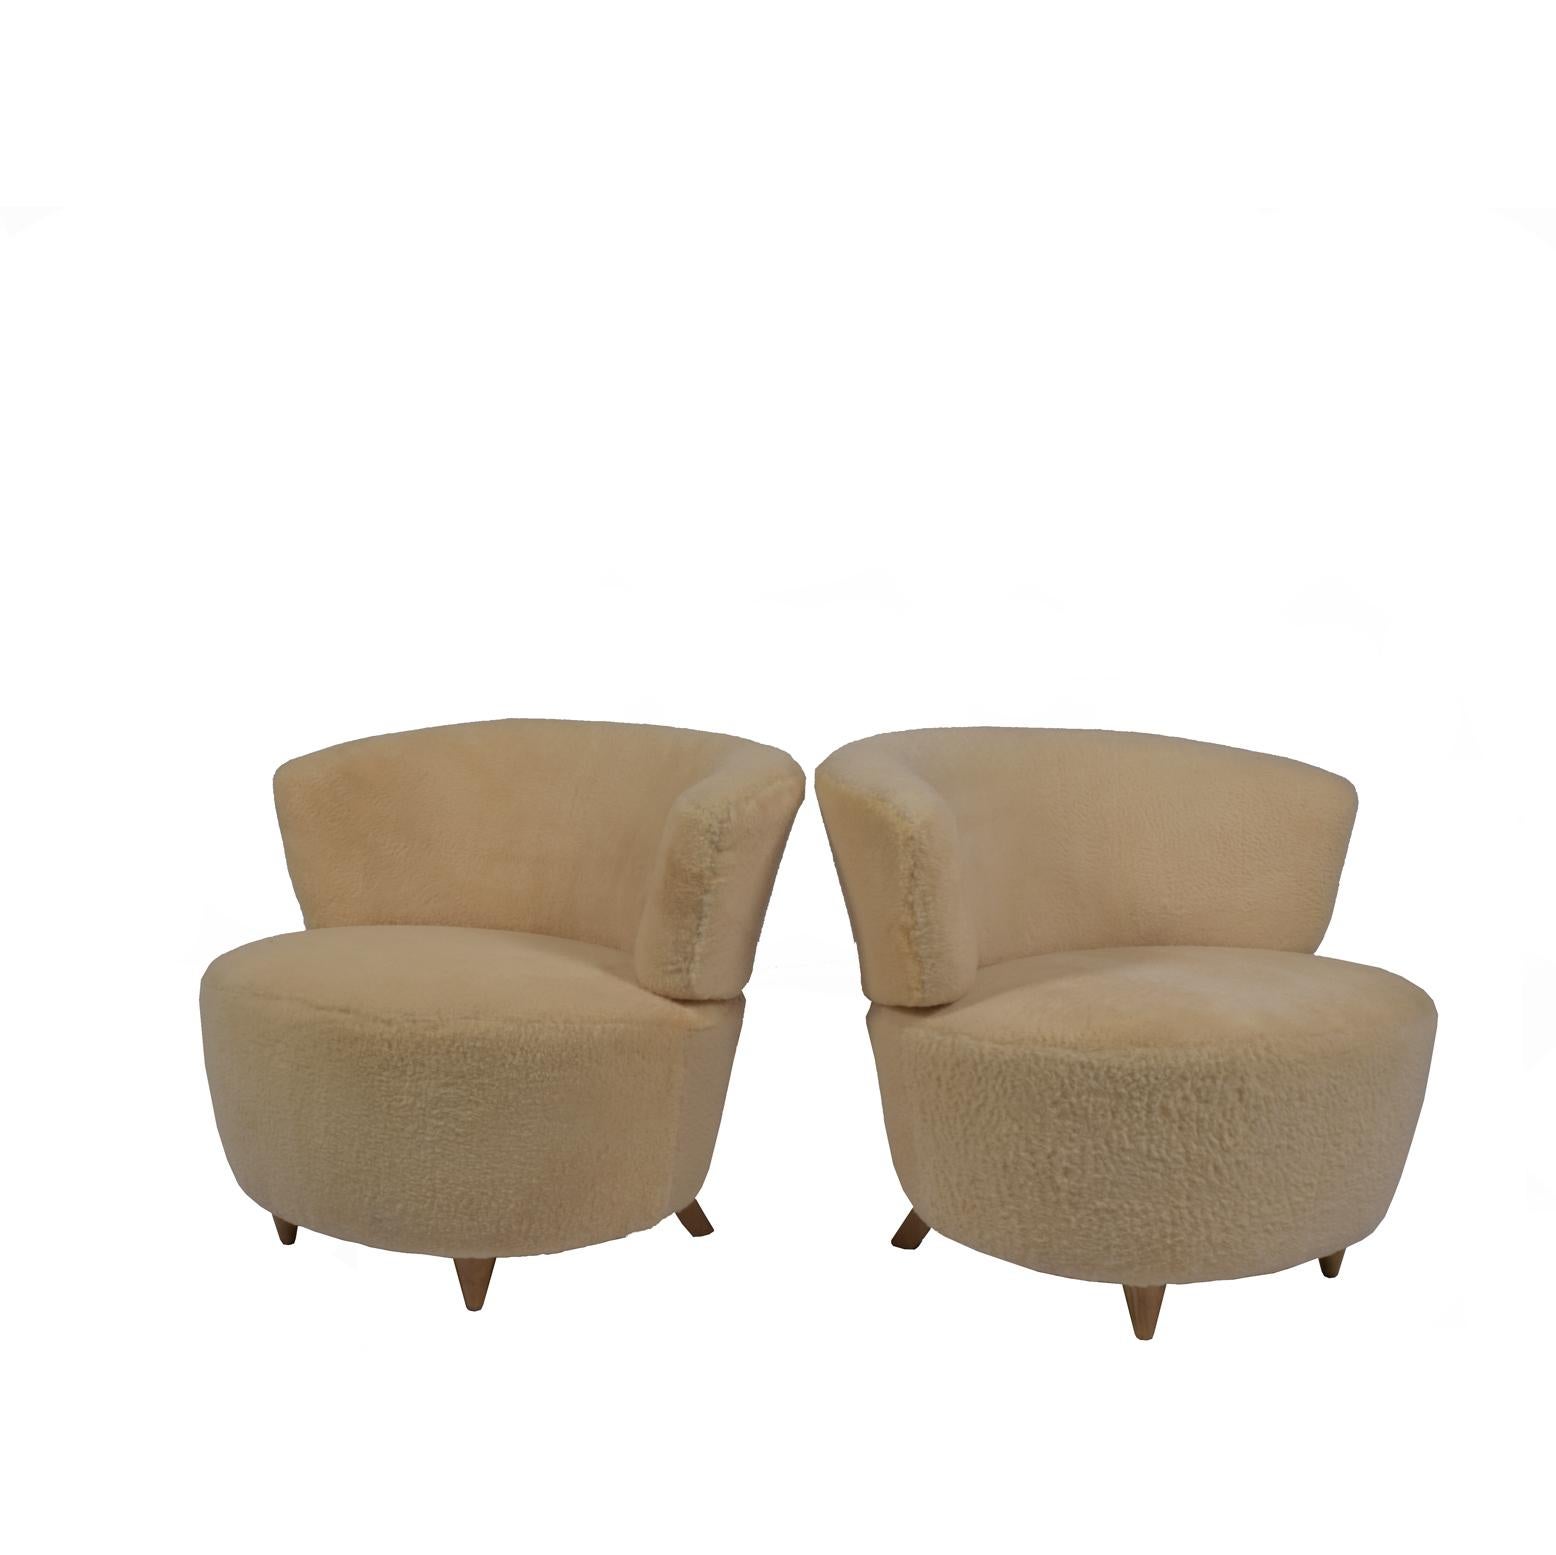 Two lounges design by Gilbert Rohde circa 1940 for Herman Miller new upholstery I sheep skin.